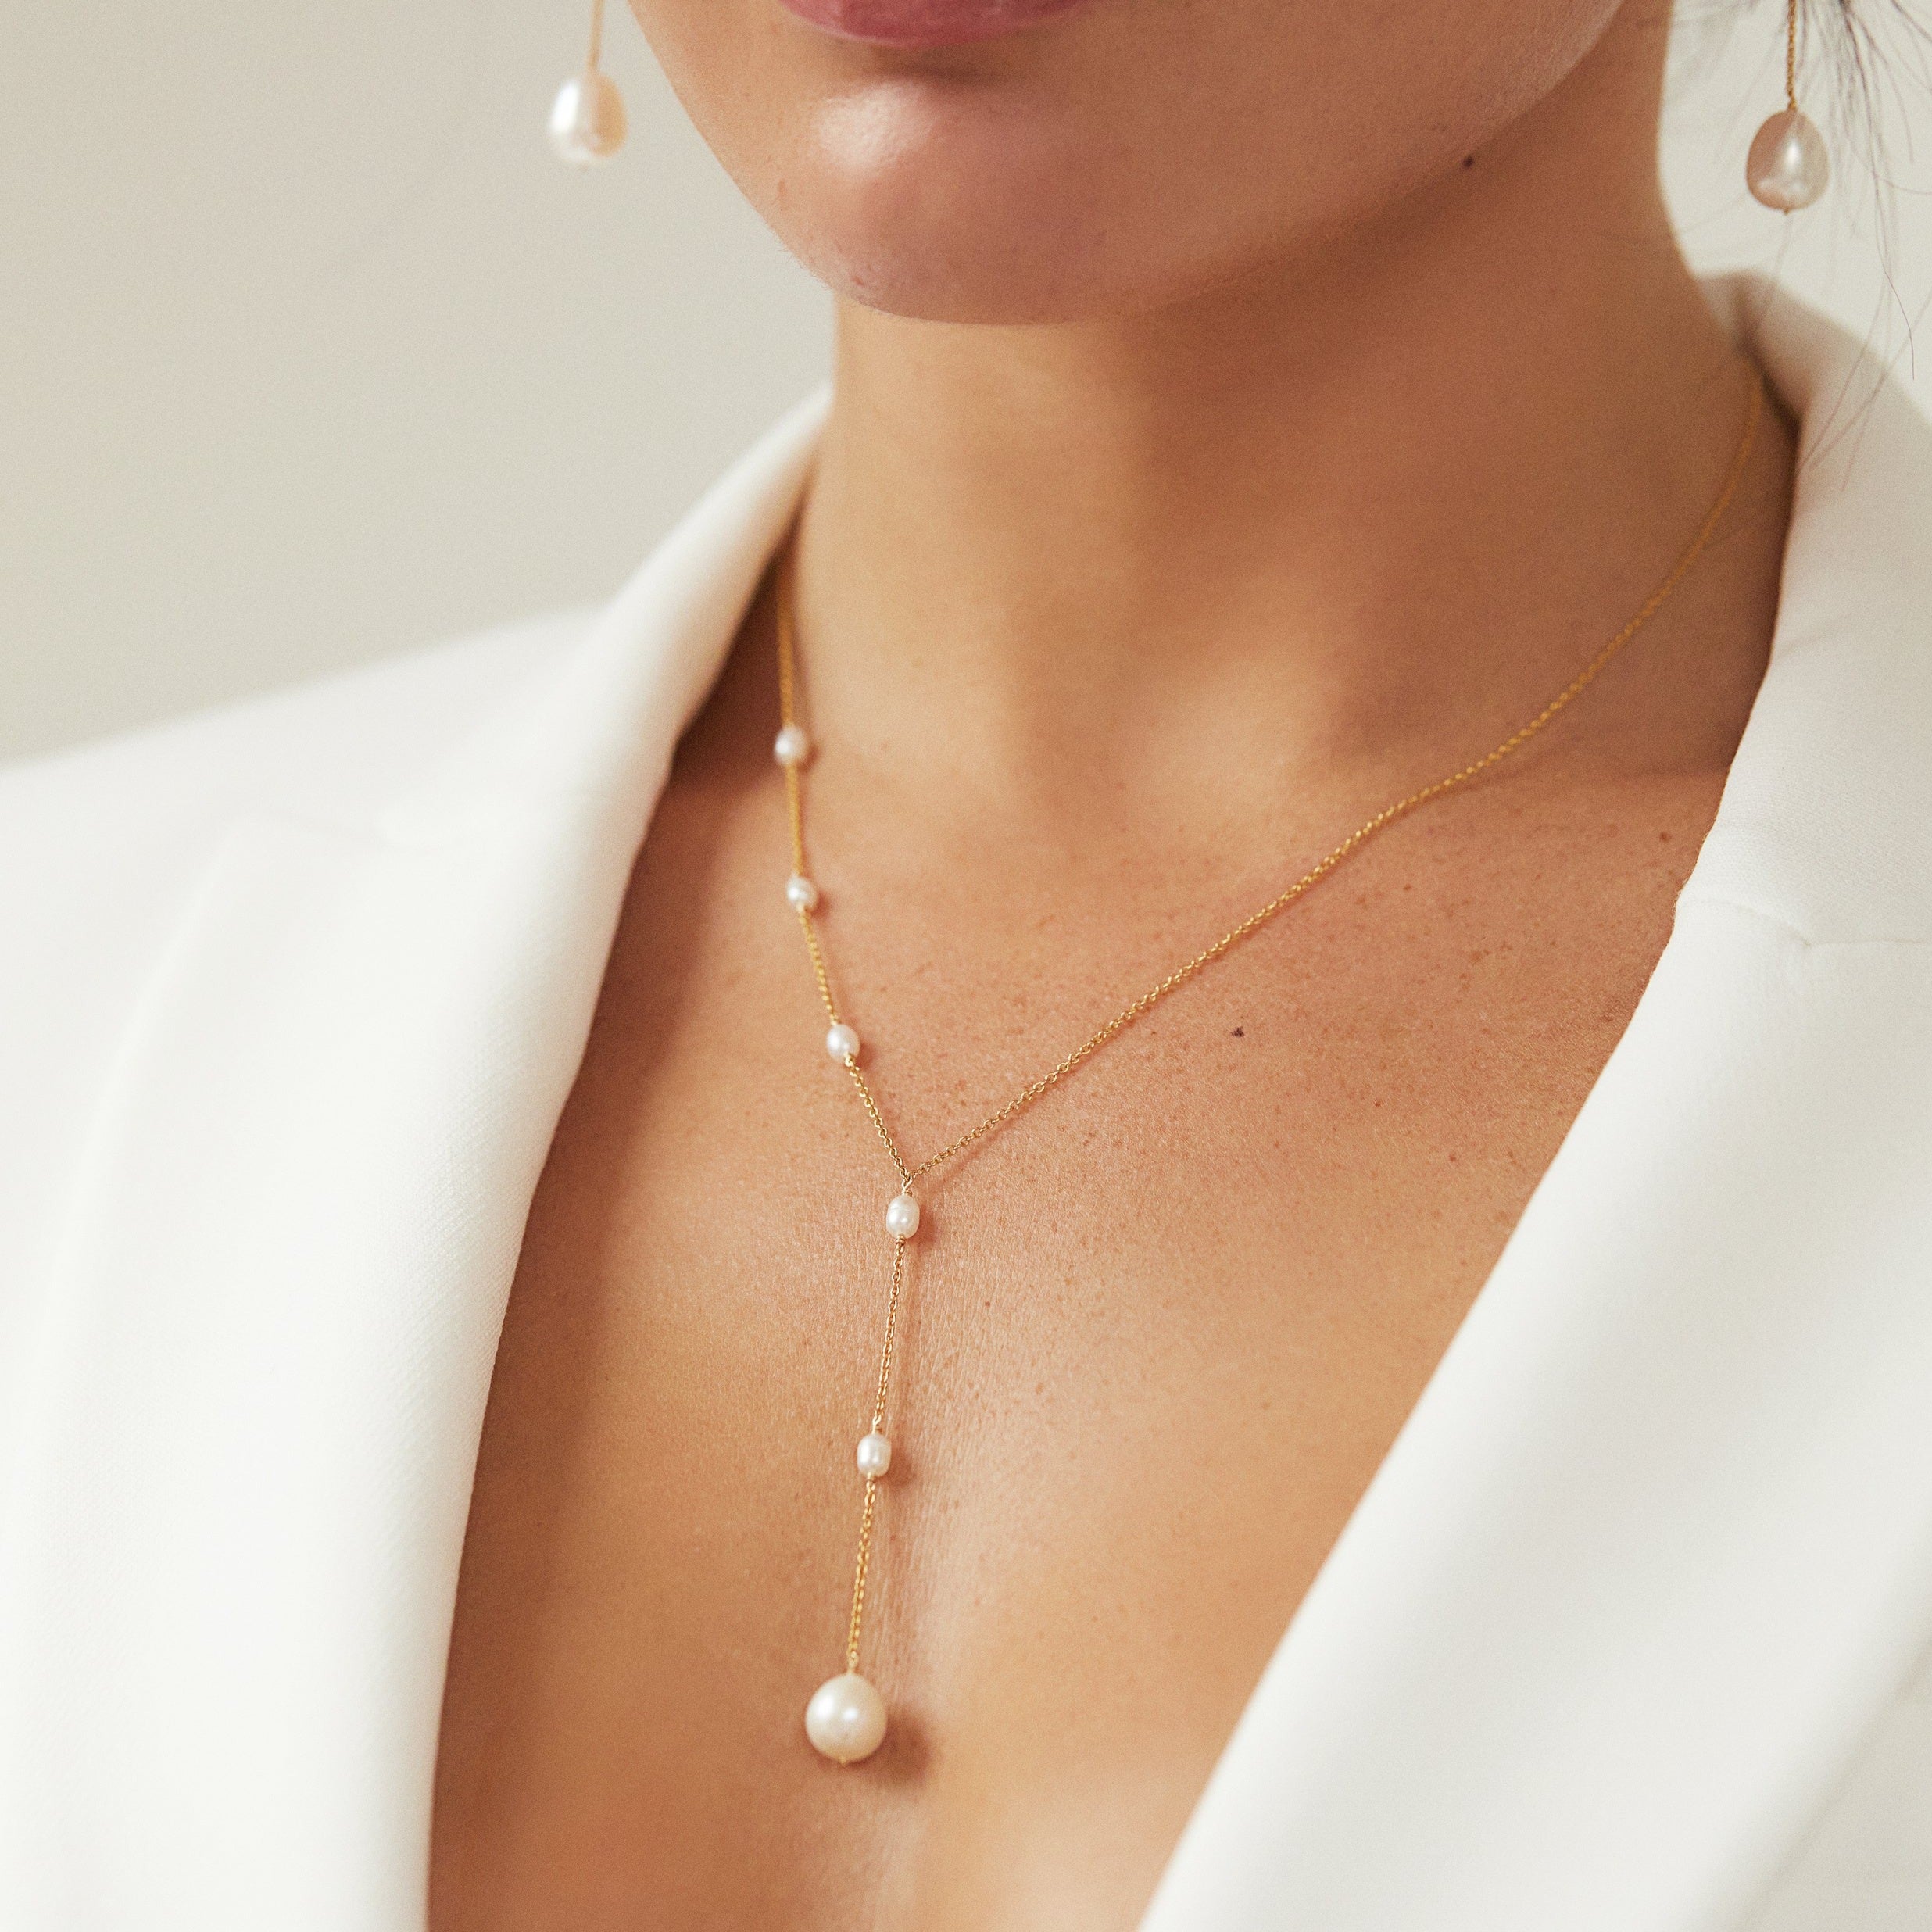 Solid White Gold Seed Pearl Lariat Necklace